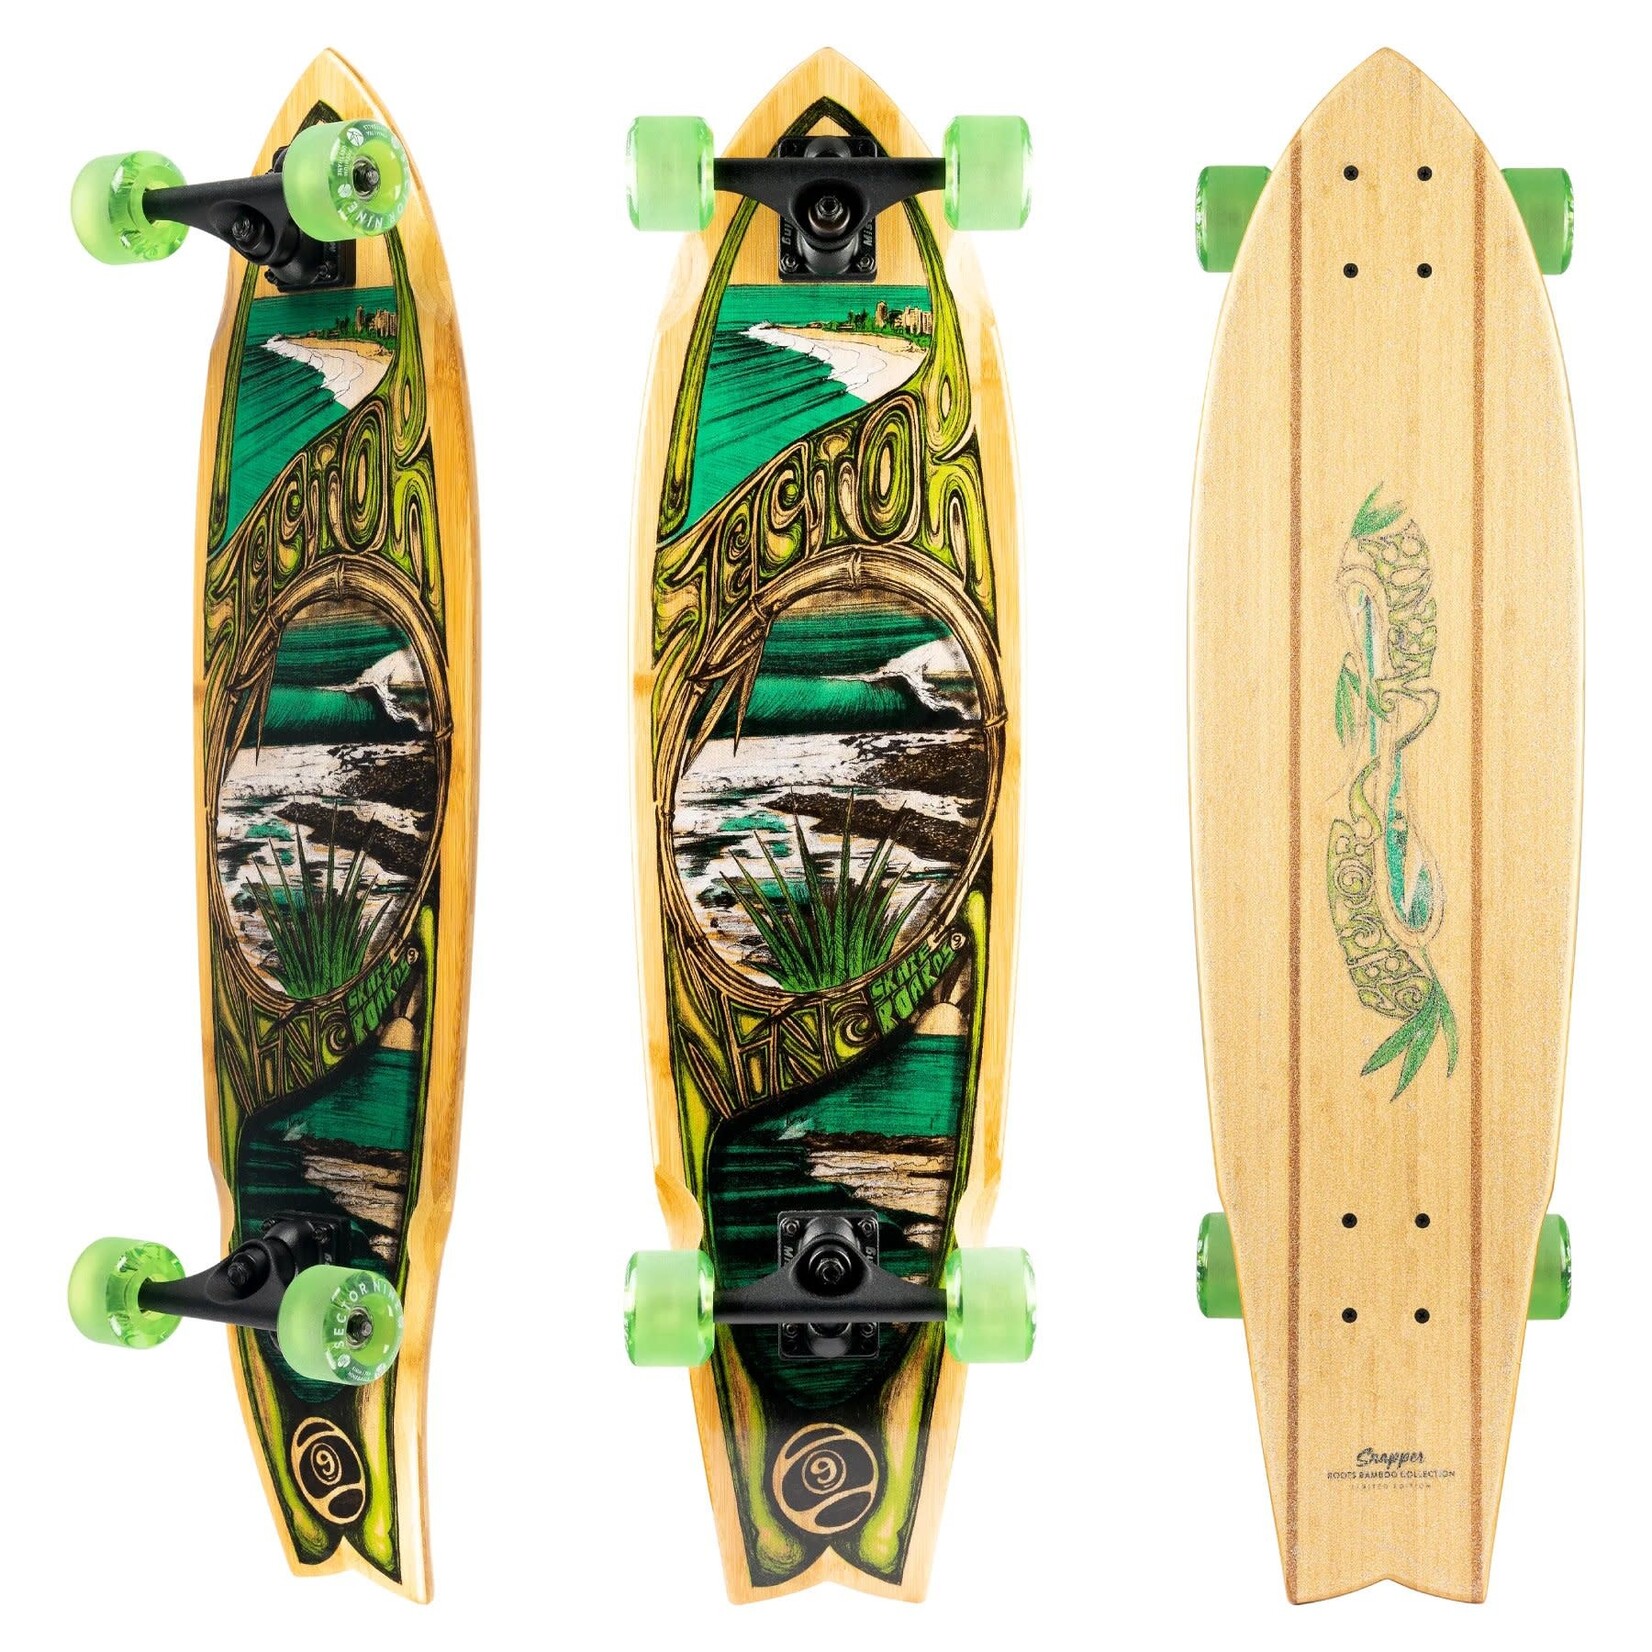 Sector 9 Sector 9 Snapper Complete - 34.0" x 8.75"